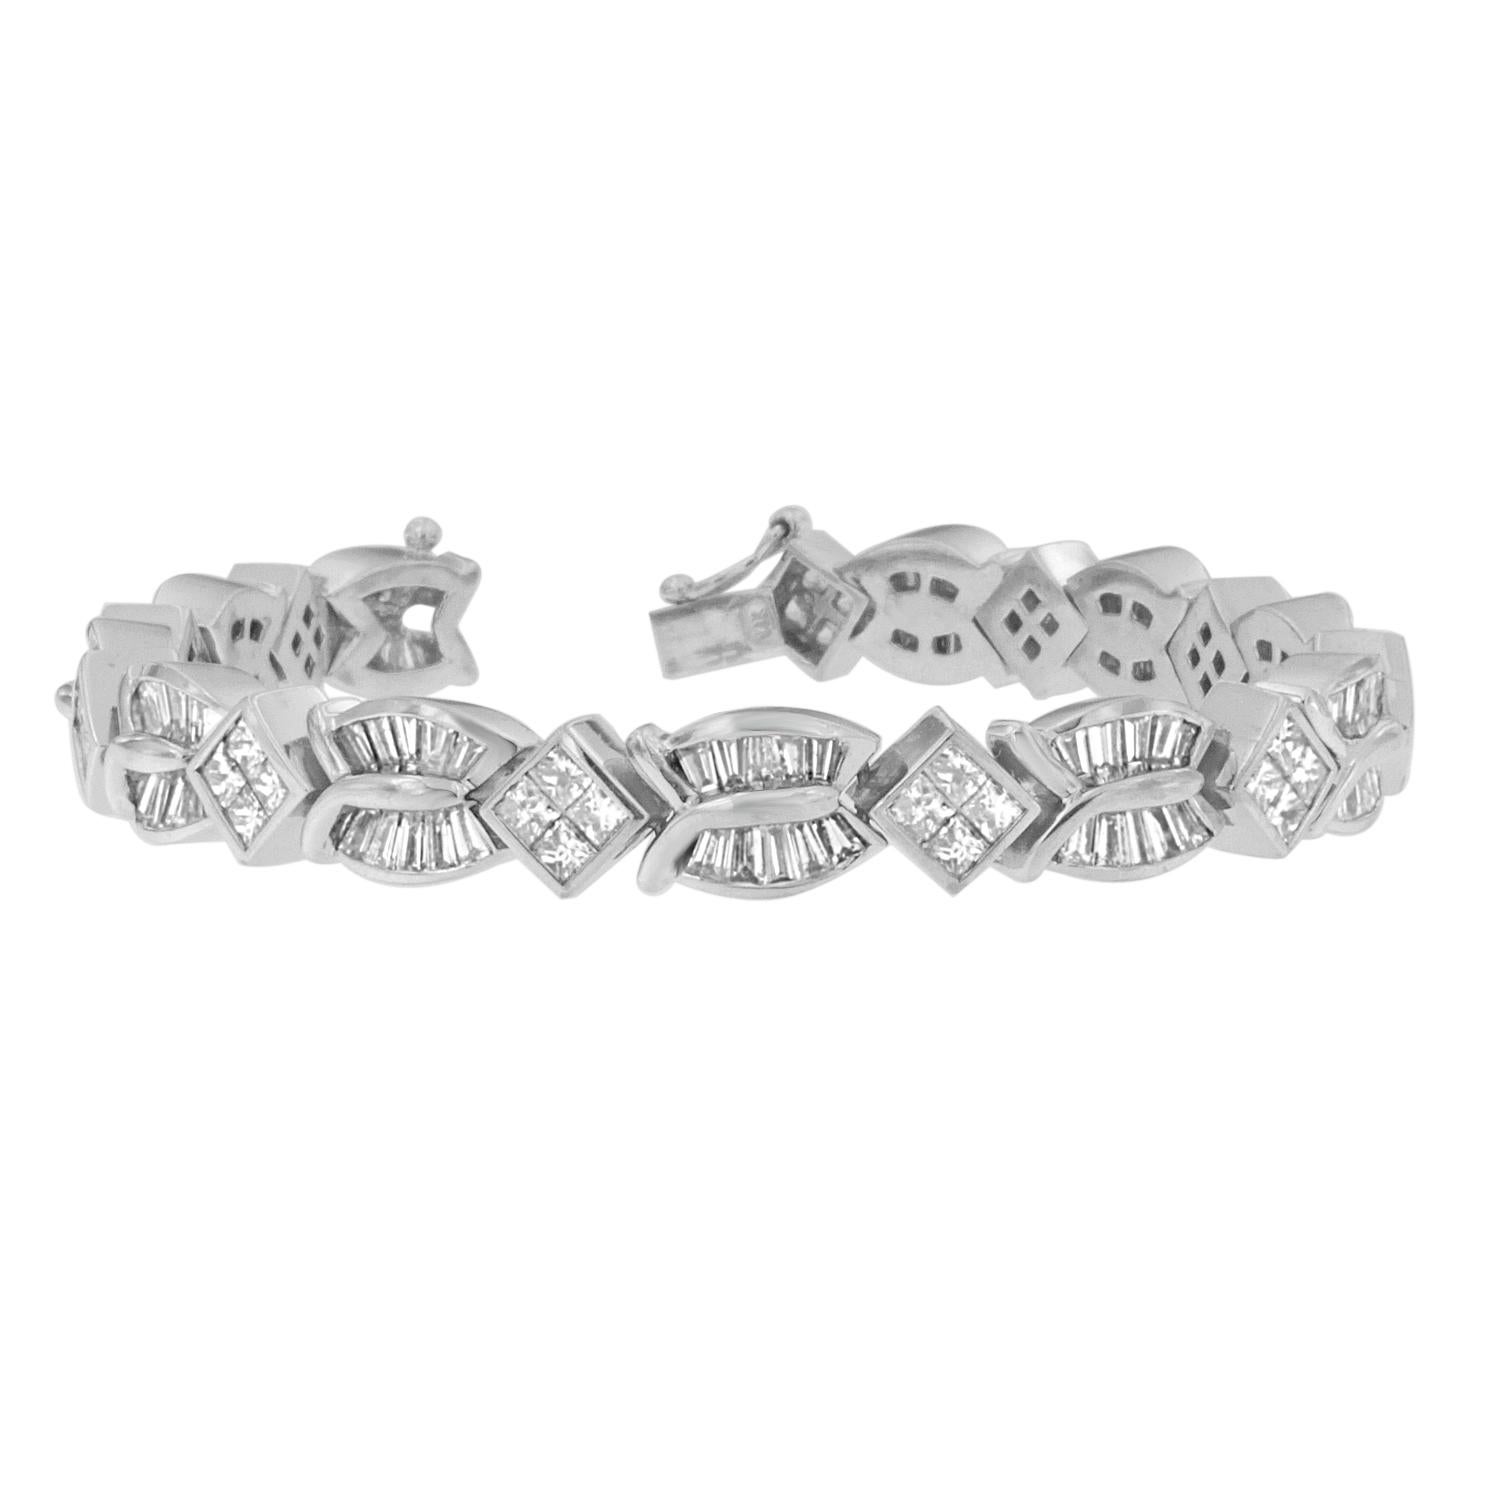 The rich texture of this 14 karat white gold bracelet is what makes it so uniquely charming. Featuring over 8 carats of princess and baguette cut diamonds, each intricate twist and turn was designed to catch the light, inspiring plenty of envious